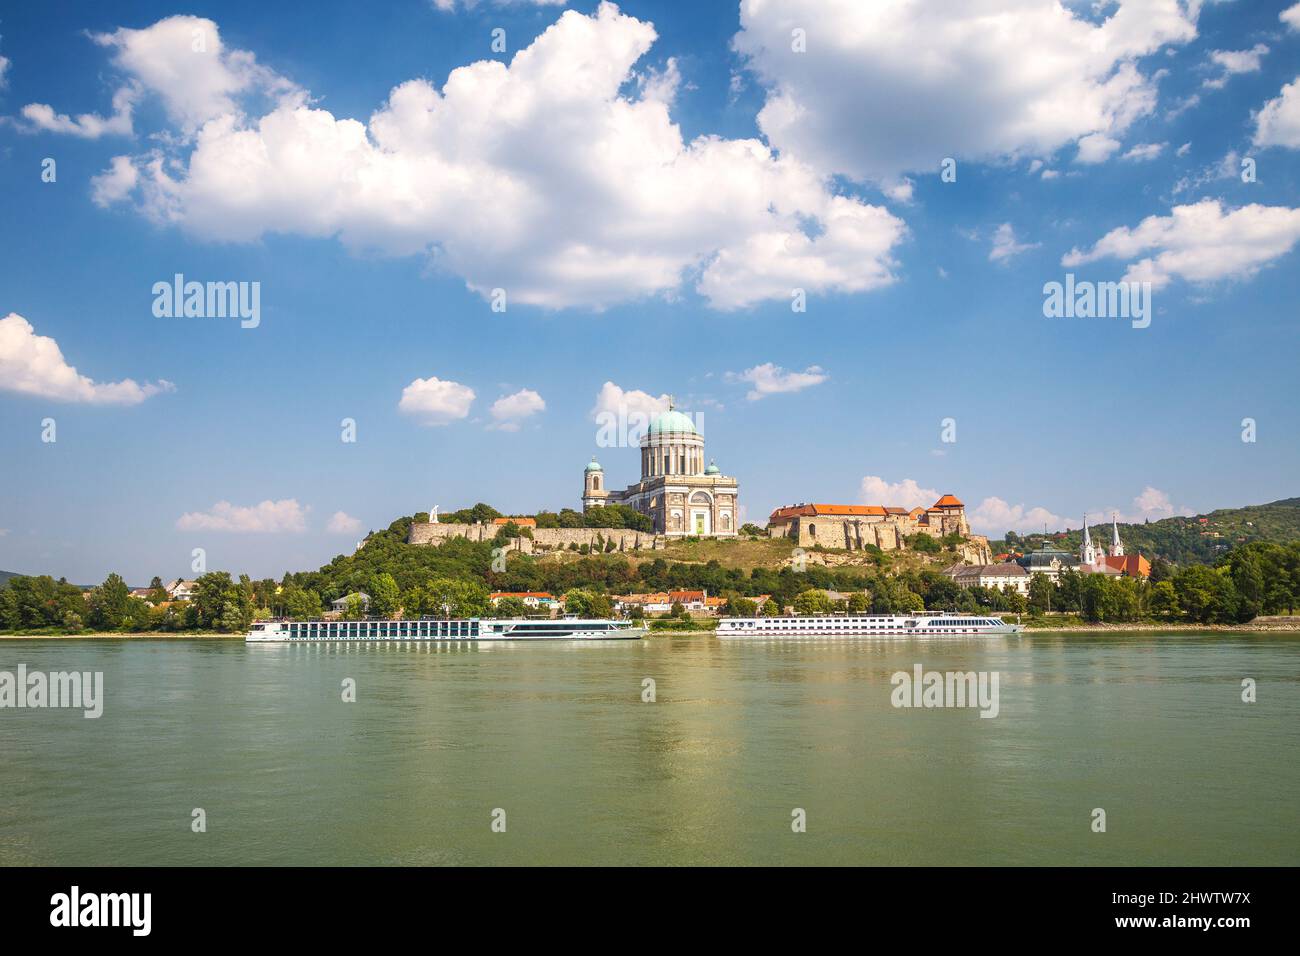 View of the Esztergom Basilica above the Danube river, Hungary, Europe. Stock Photo